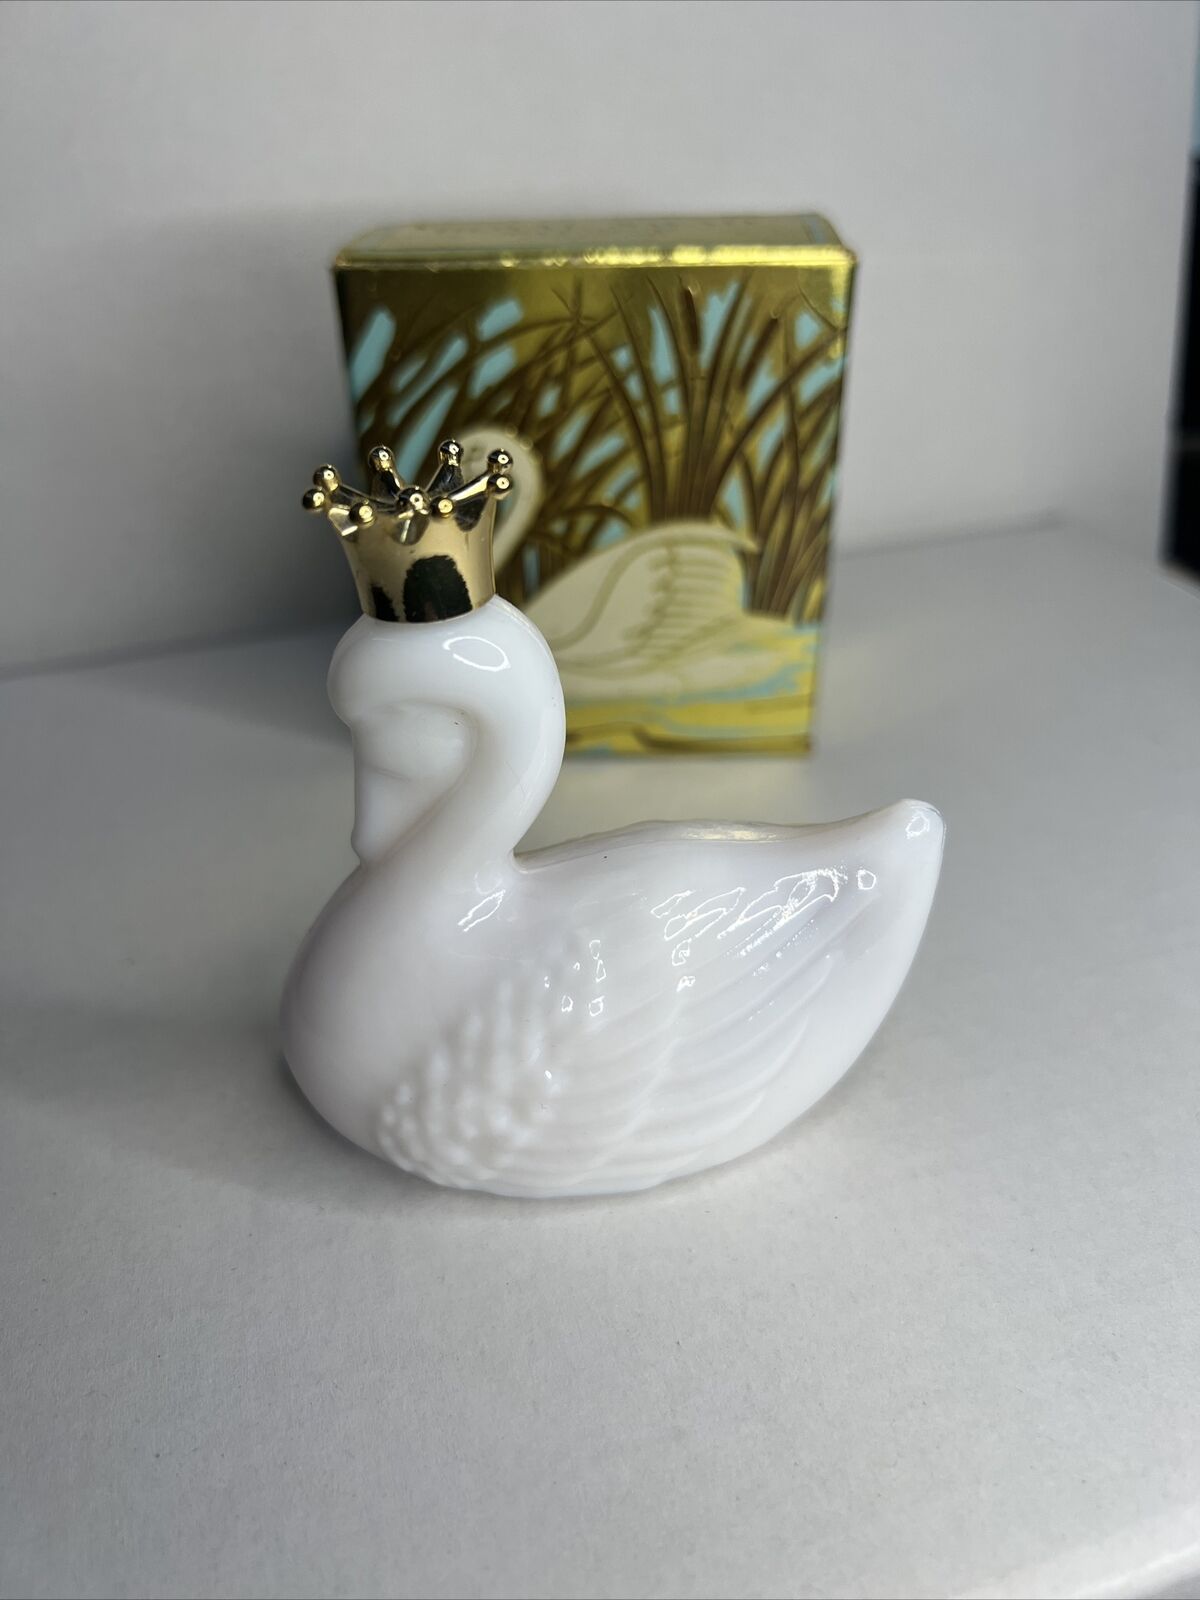 Vintage Avon Royal Swan Elusive Cologne Has Factory Flaw That Looks Like A Crack